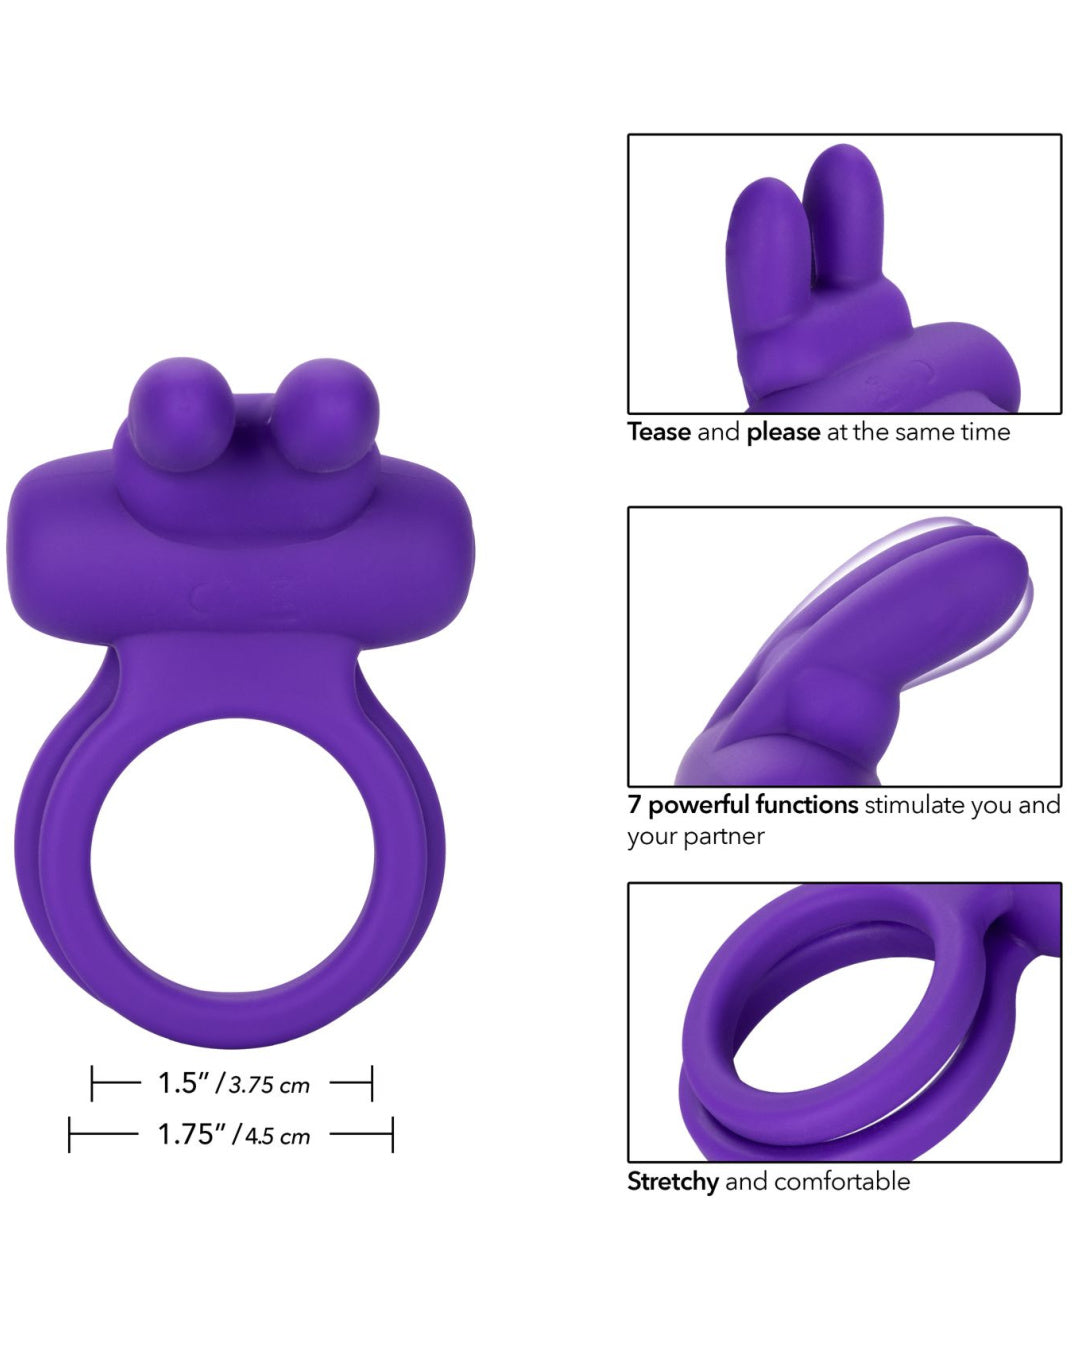 Dual Rockin Rabbit Silicone Vibrating Couples Toy by Calexotics Dimensions